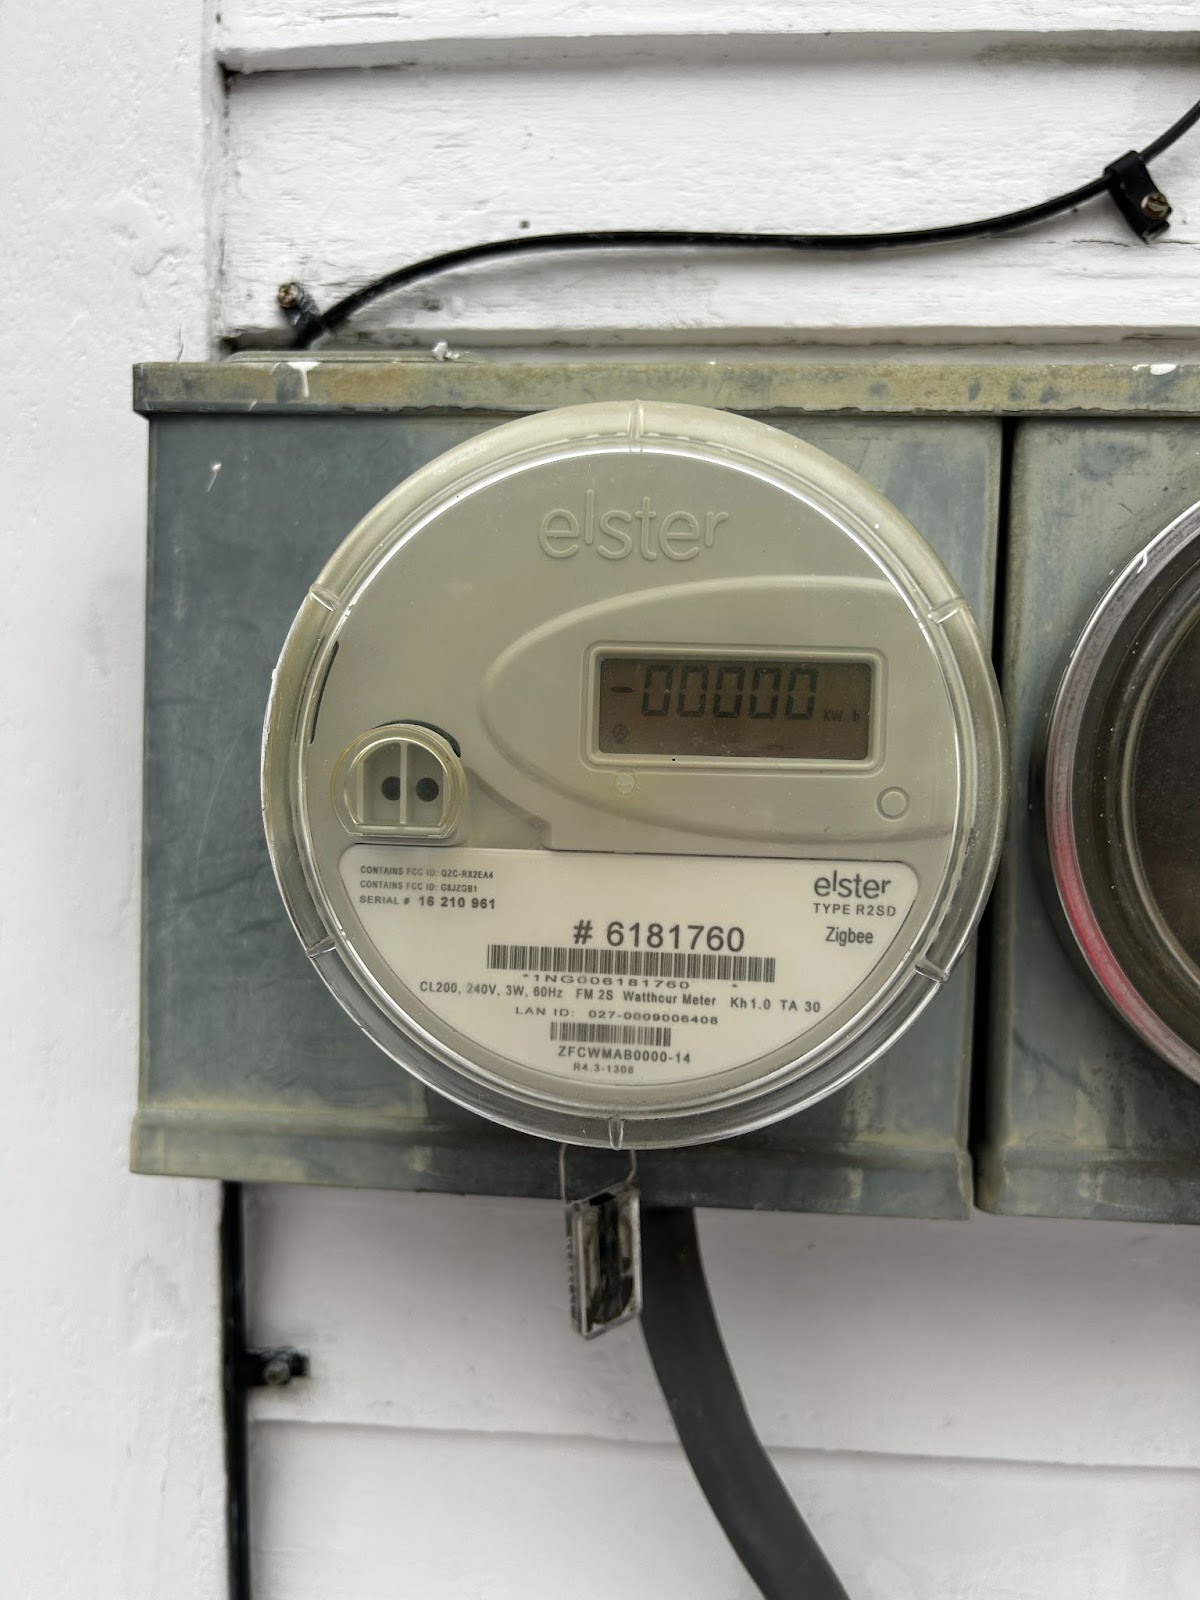 Electricity meter for a virtual site visit